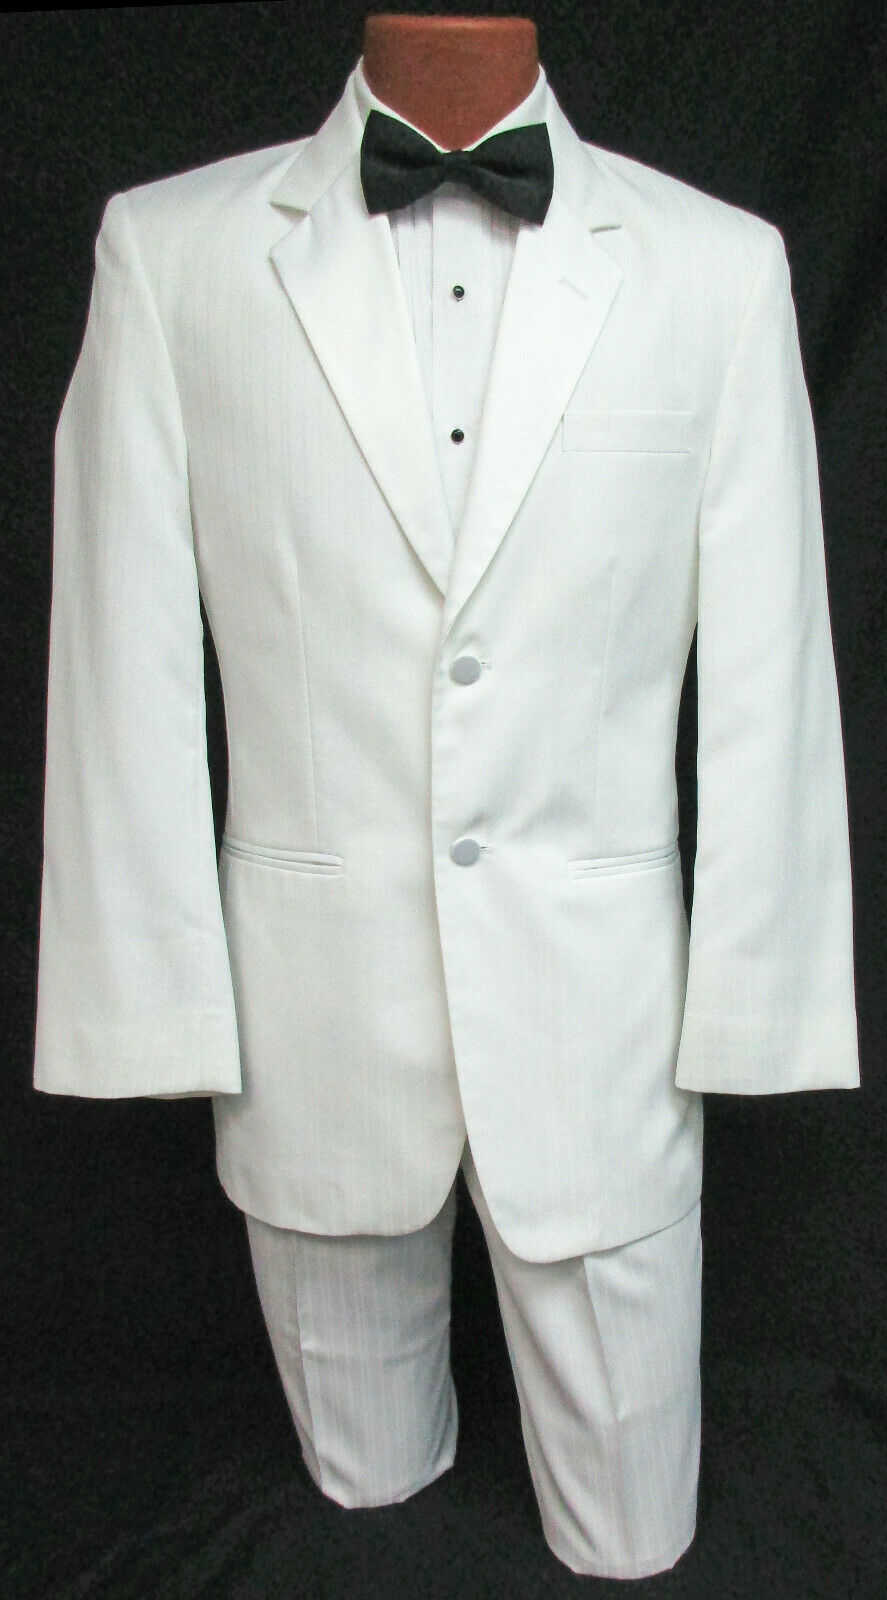 Men's White Jean Yves Tuxedo with Pants Discount Cheap Sale Clearance 40R 34W